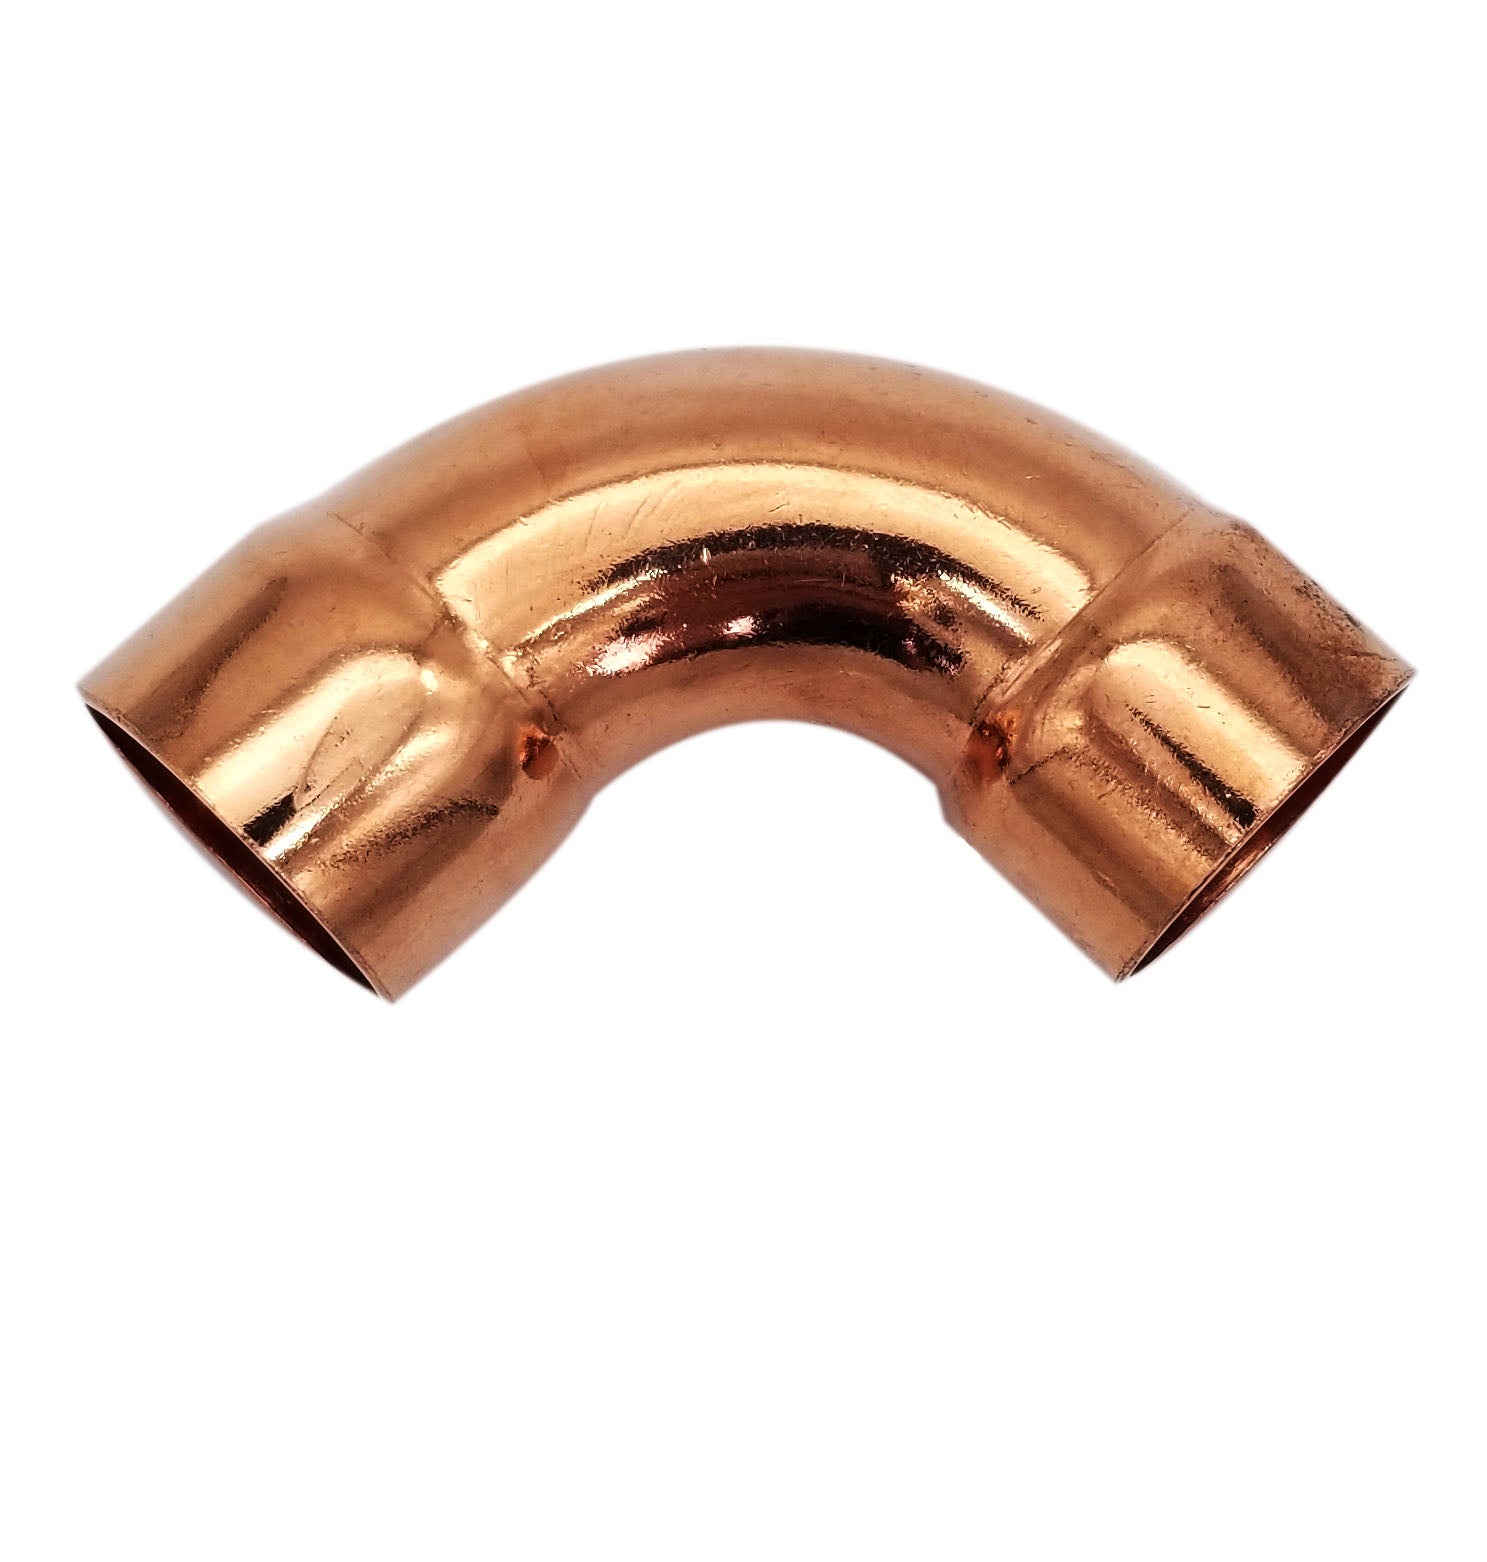 Copper Fitting 3/8 Inch (HVAC Outer Dimension) 1/4 Inch (Plumbing Inner Dimension) - Copper Long Radius 90° Elbow Fitting with 2 Solder Cups & HVAC – 99.9% Pure Copper - 10 Pack